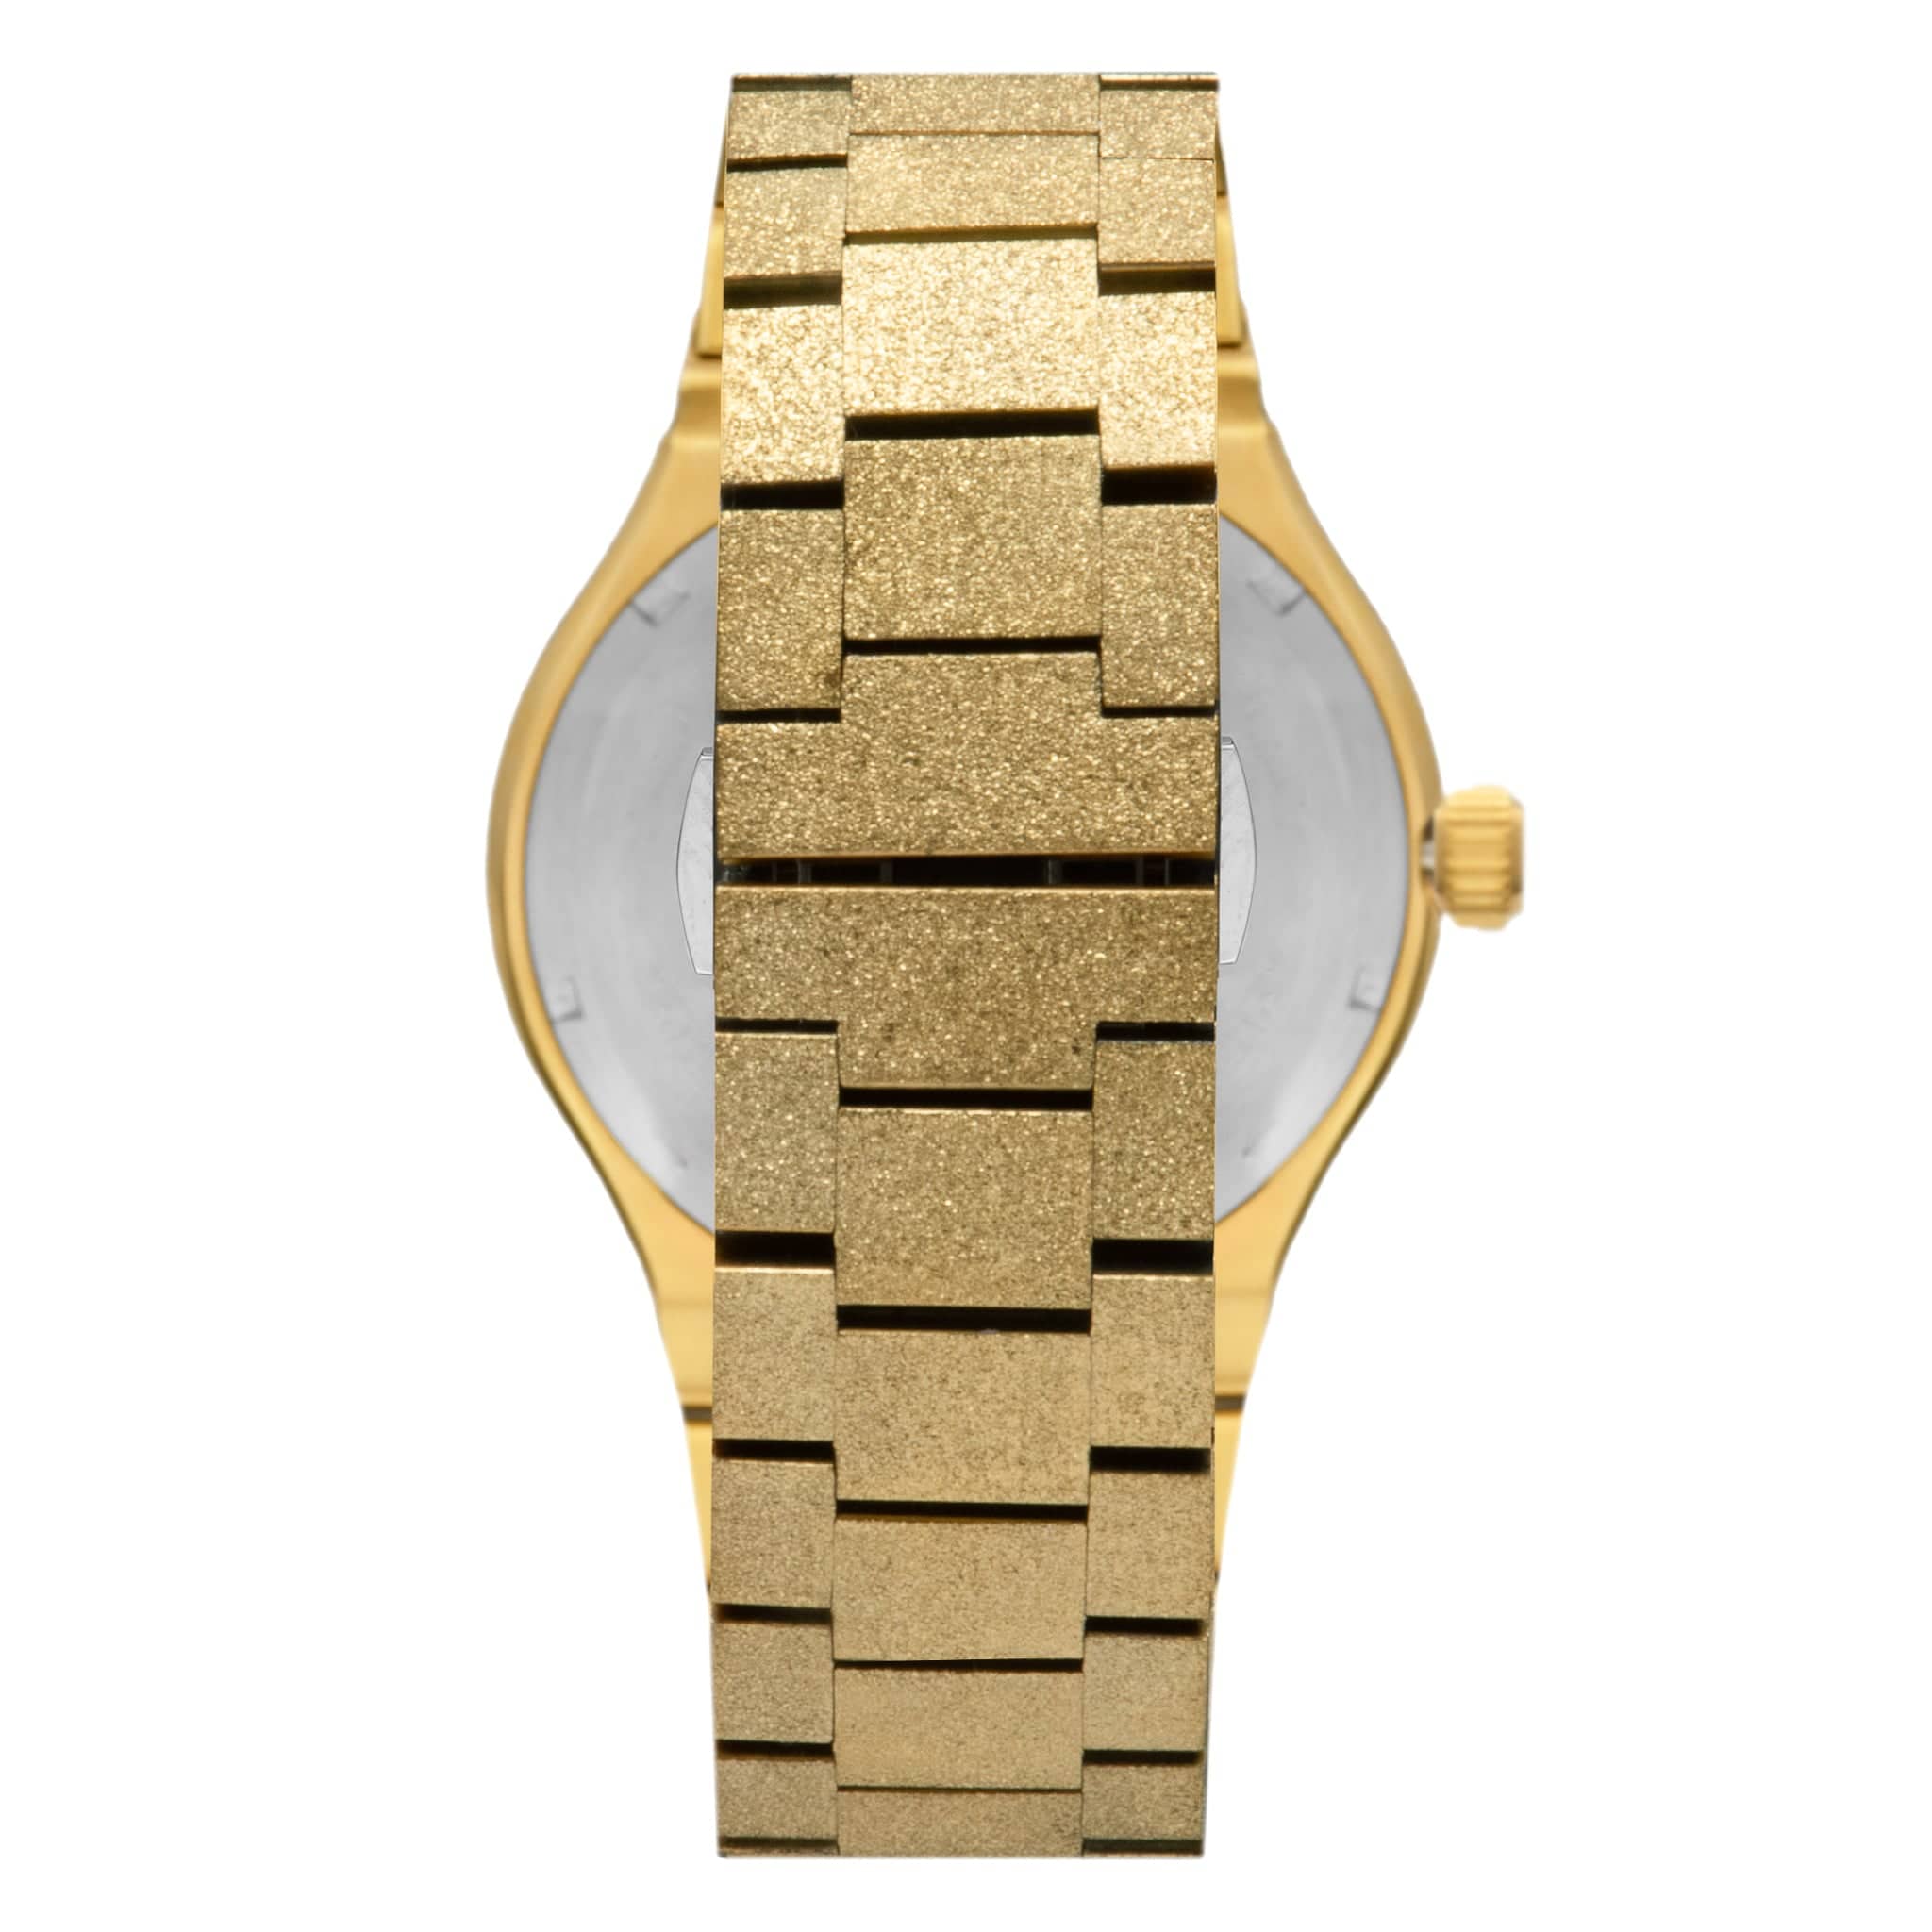 Stardust watches back gold watches for men